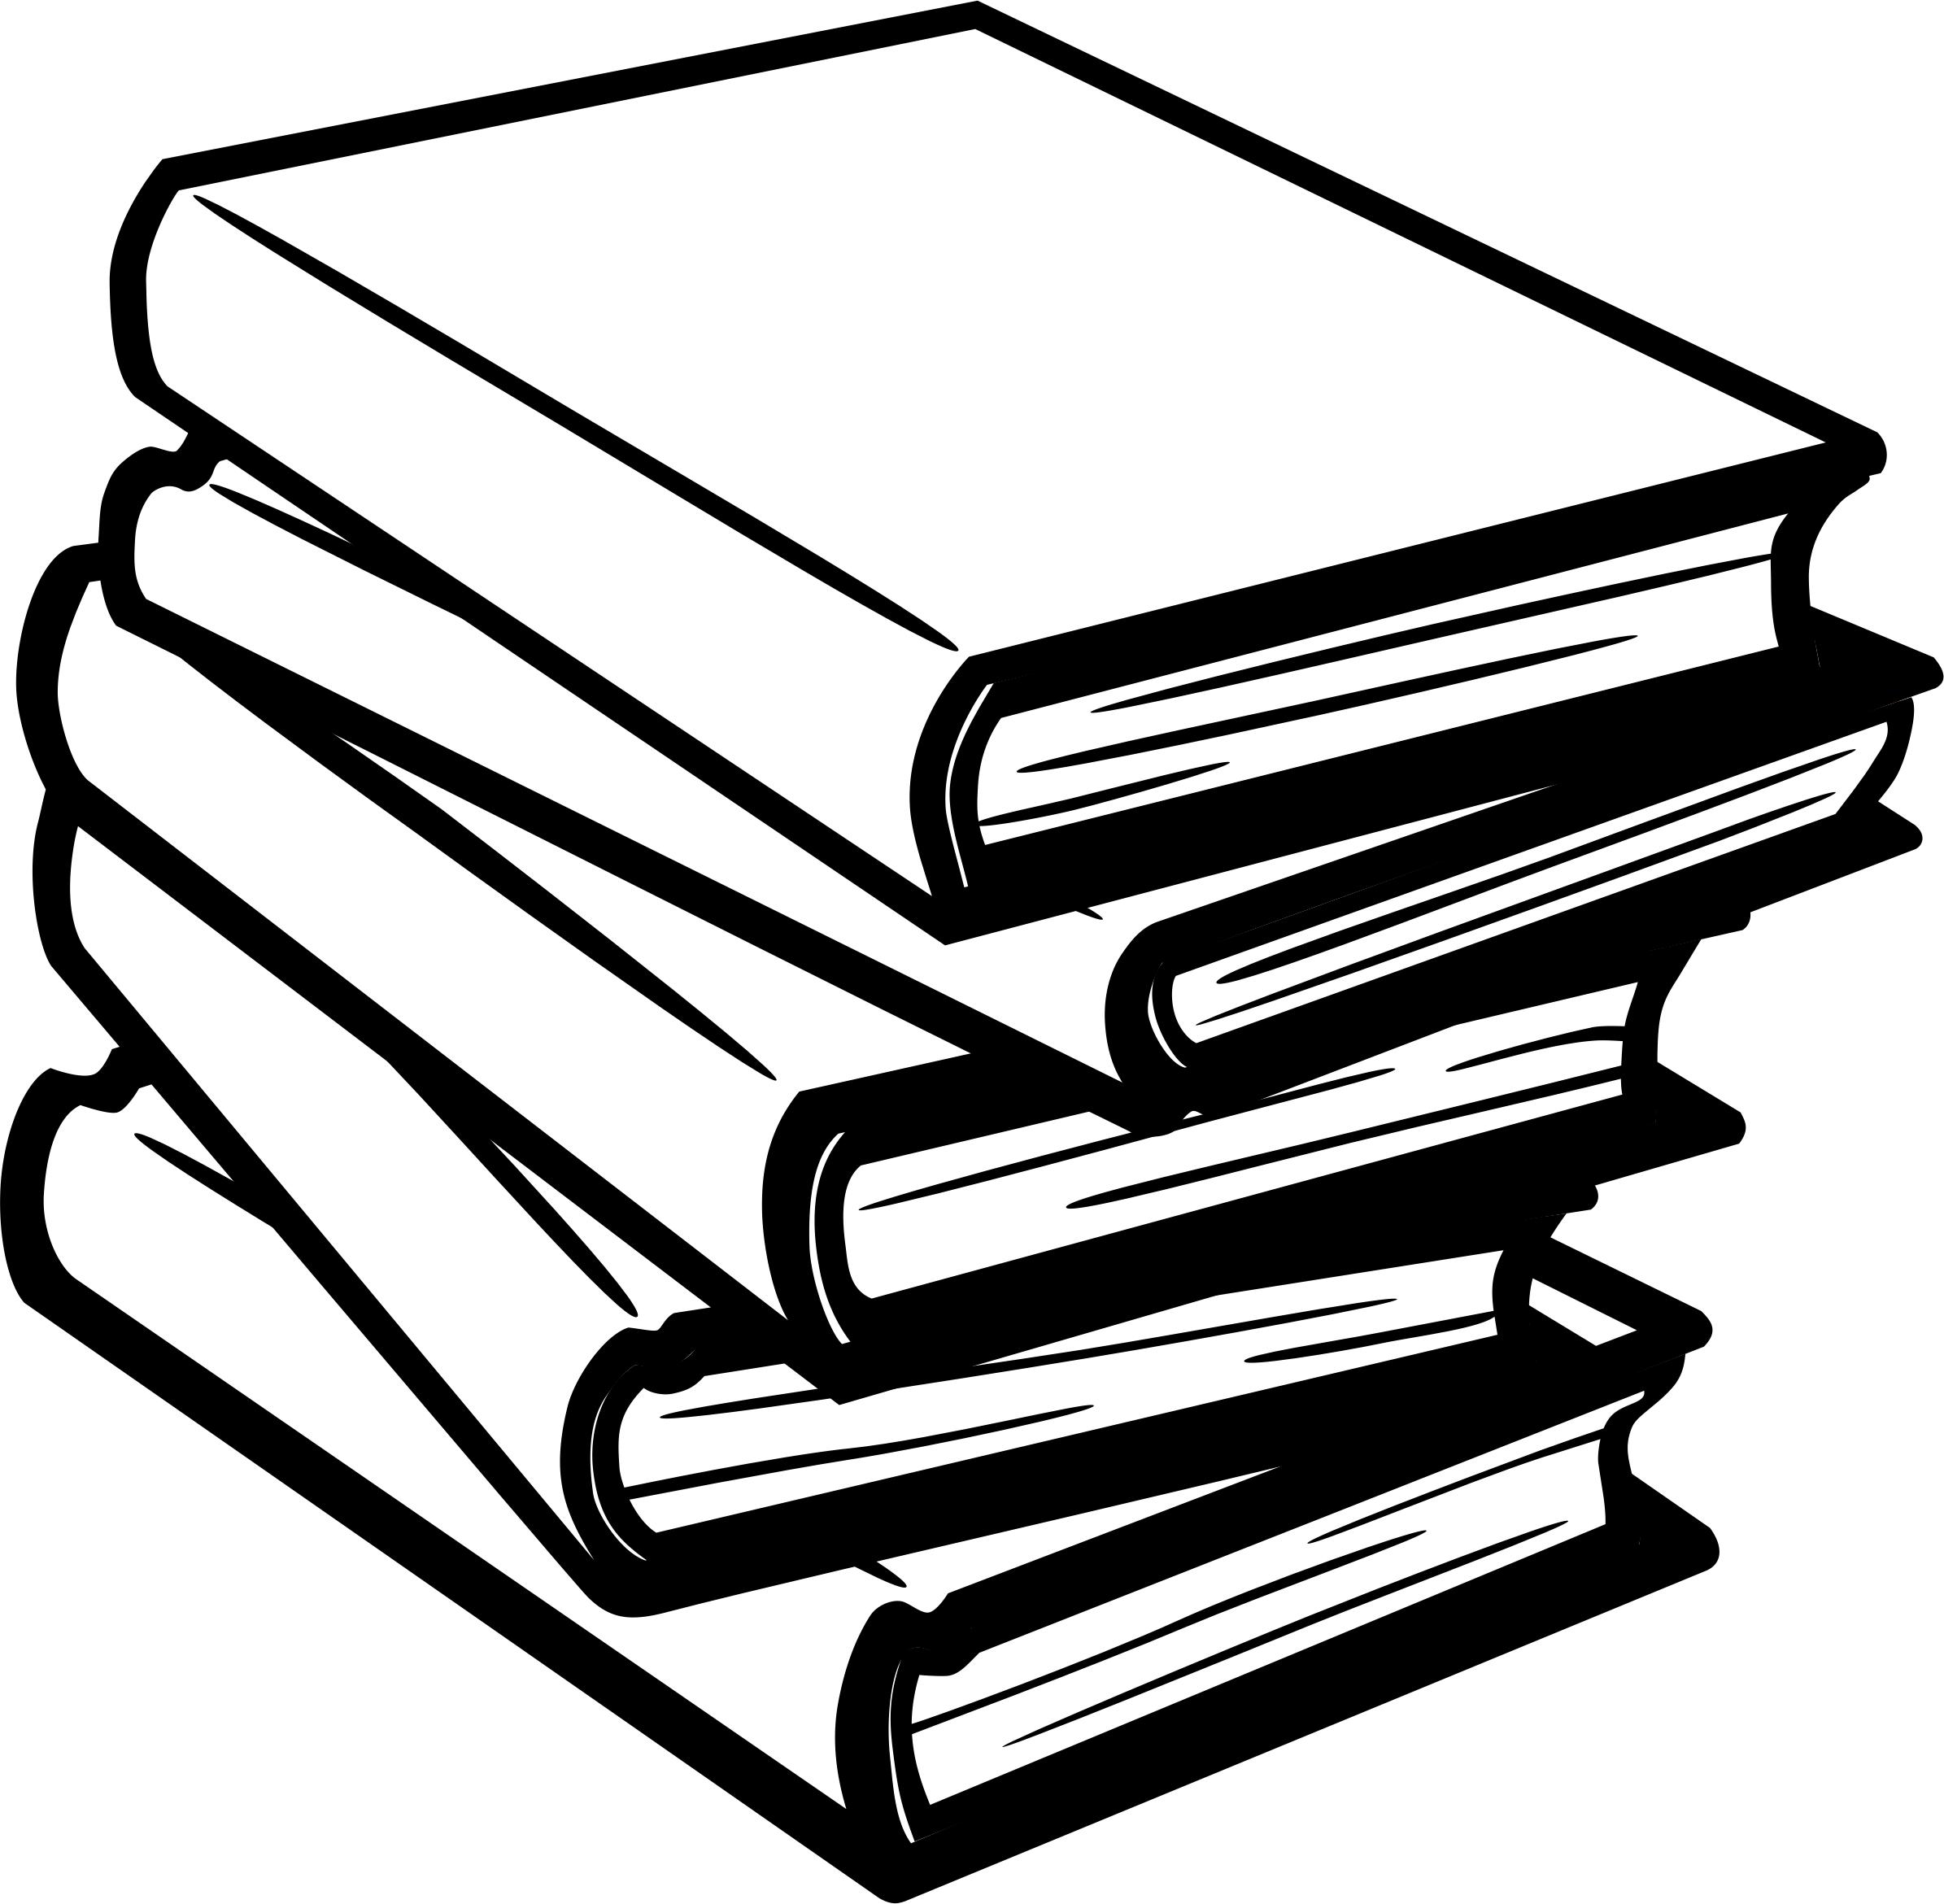 Books - Lineart - No Shading png